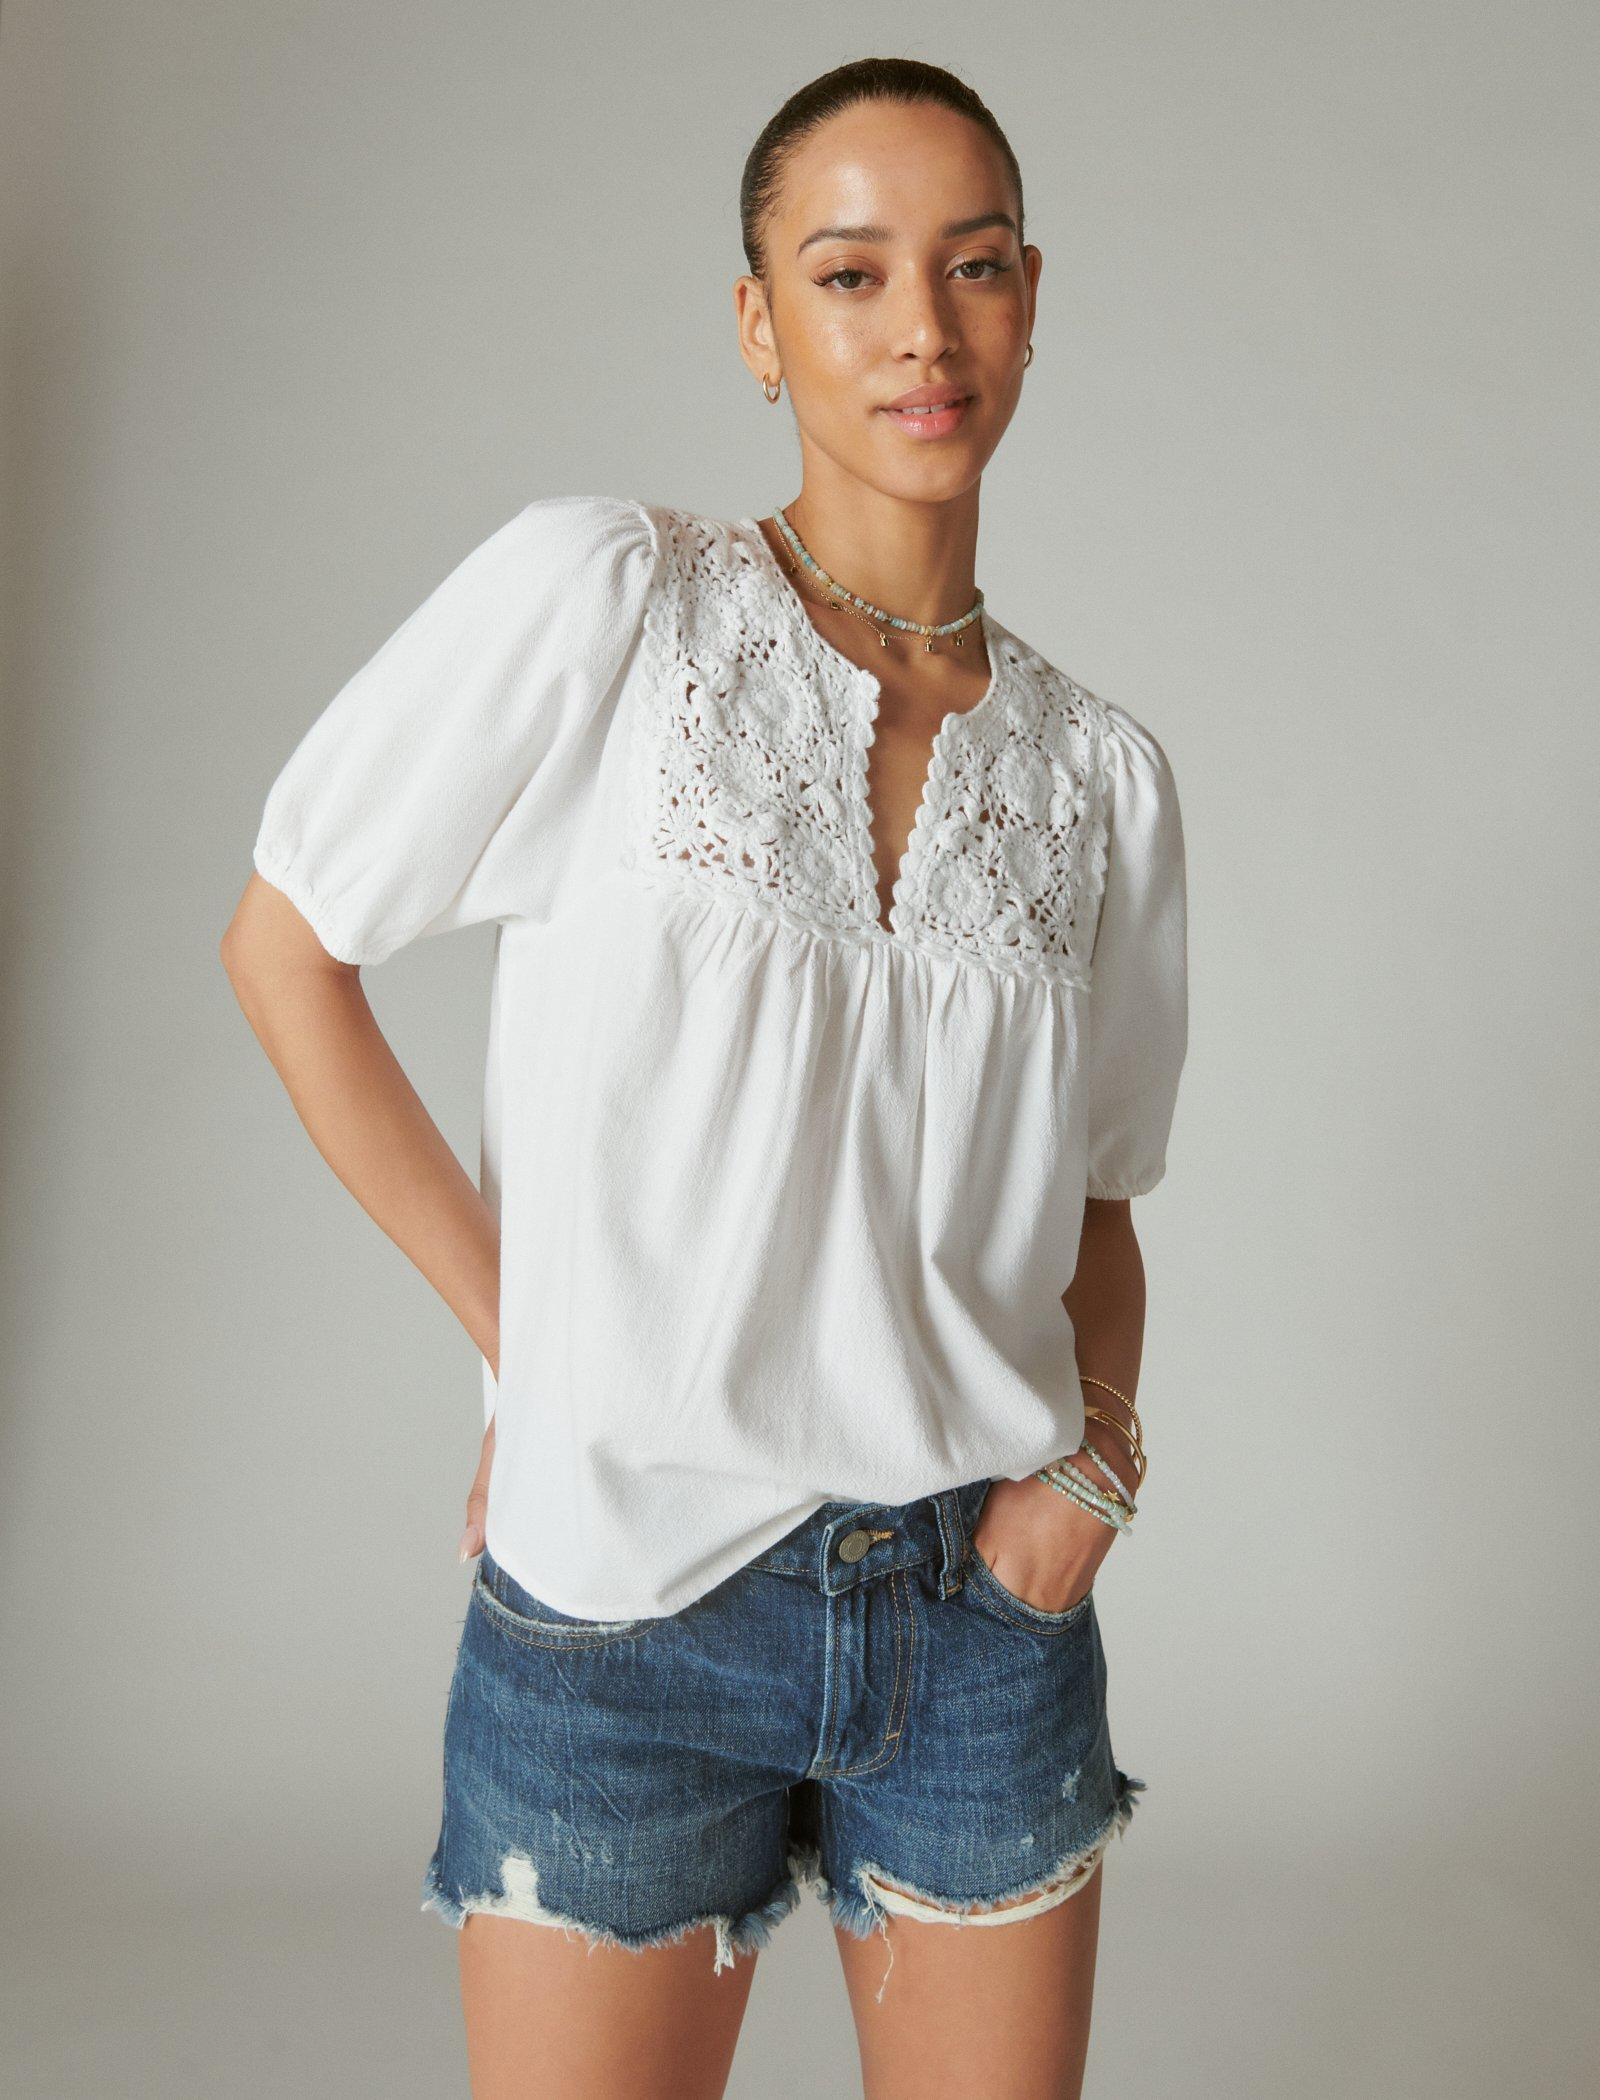 Lucky Brand Crochet Short Sleeve Peasant Top - Women's Clothing Peasant Tops Shirts Bright White